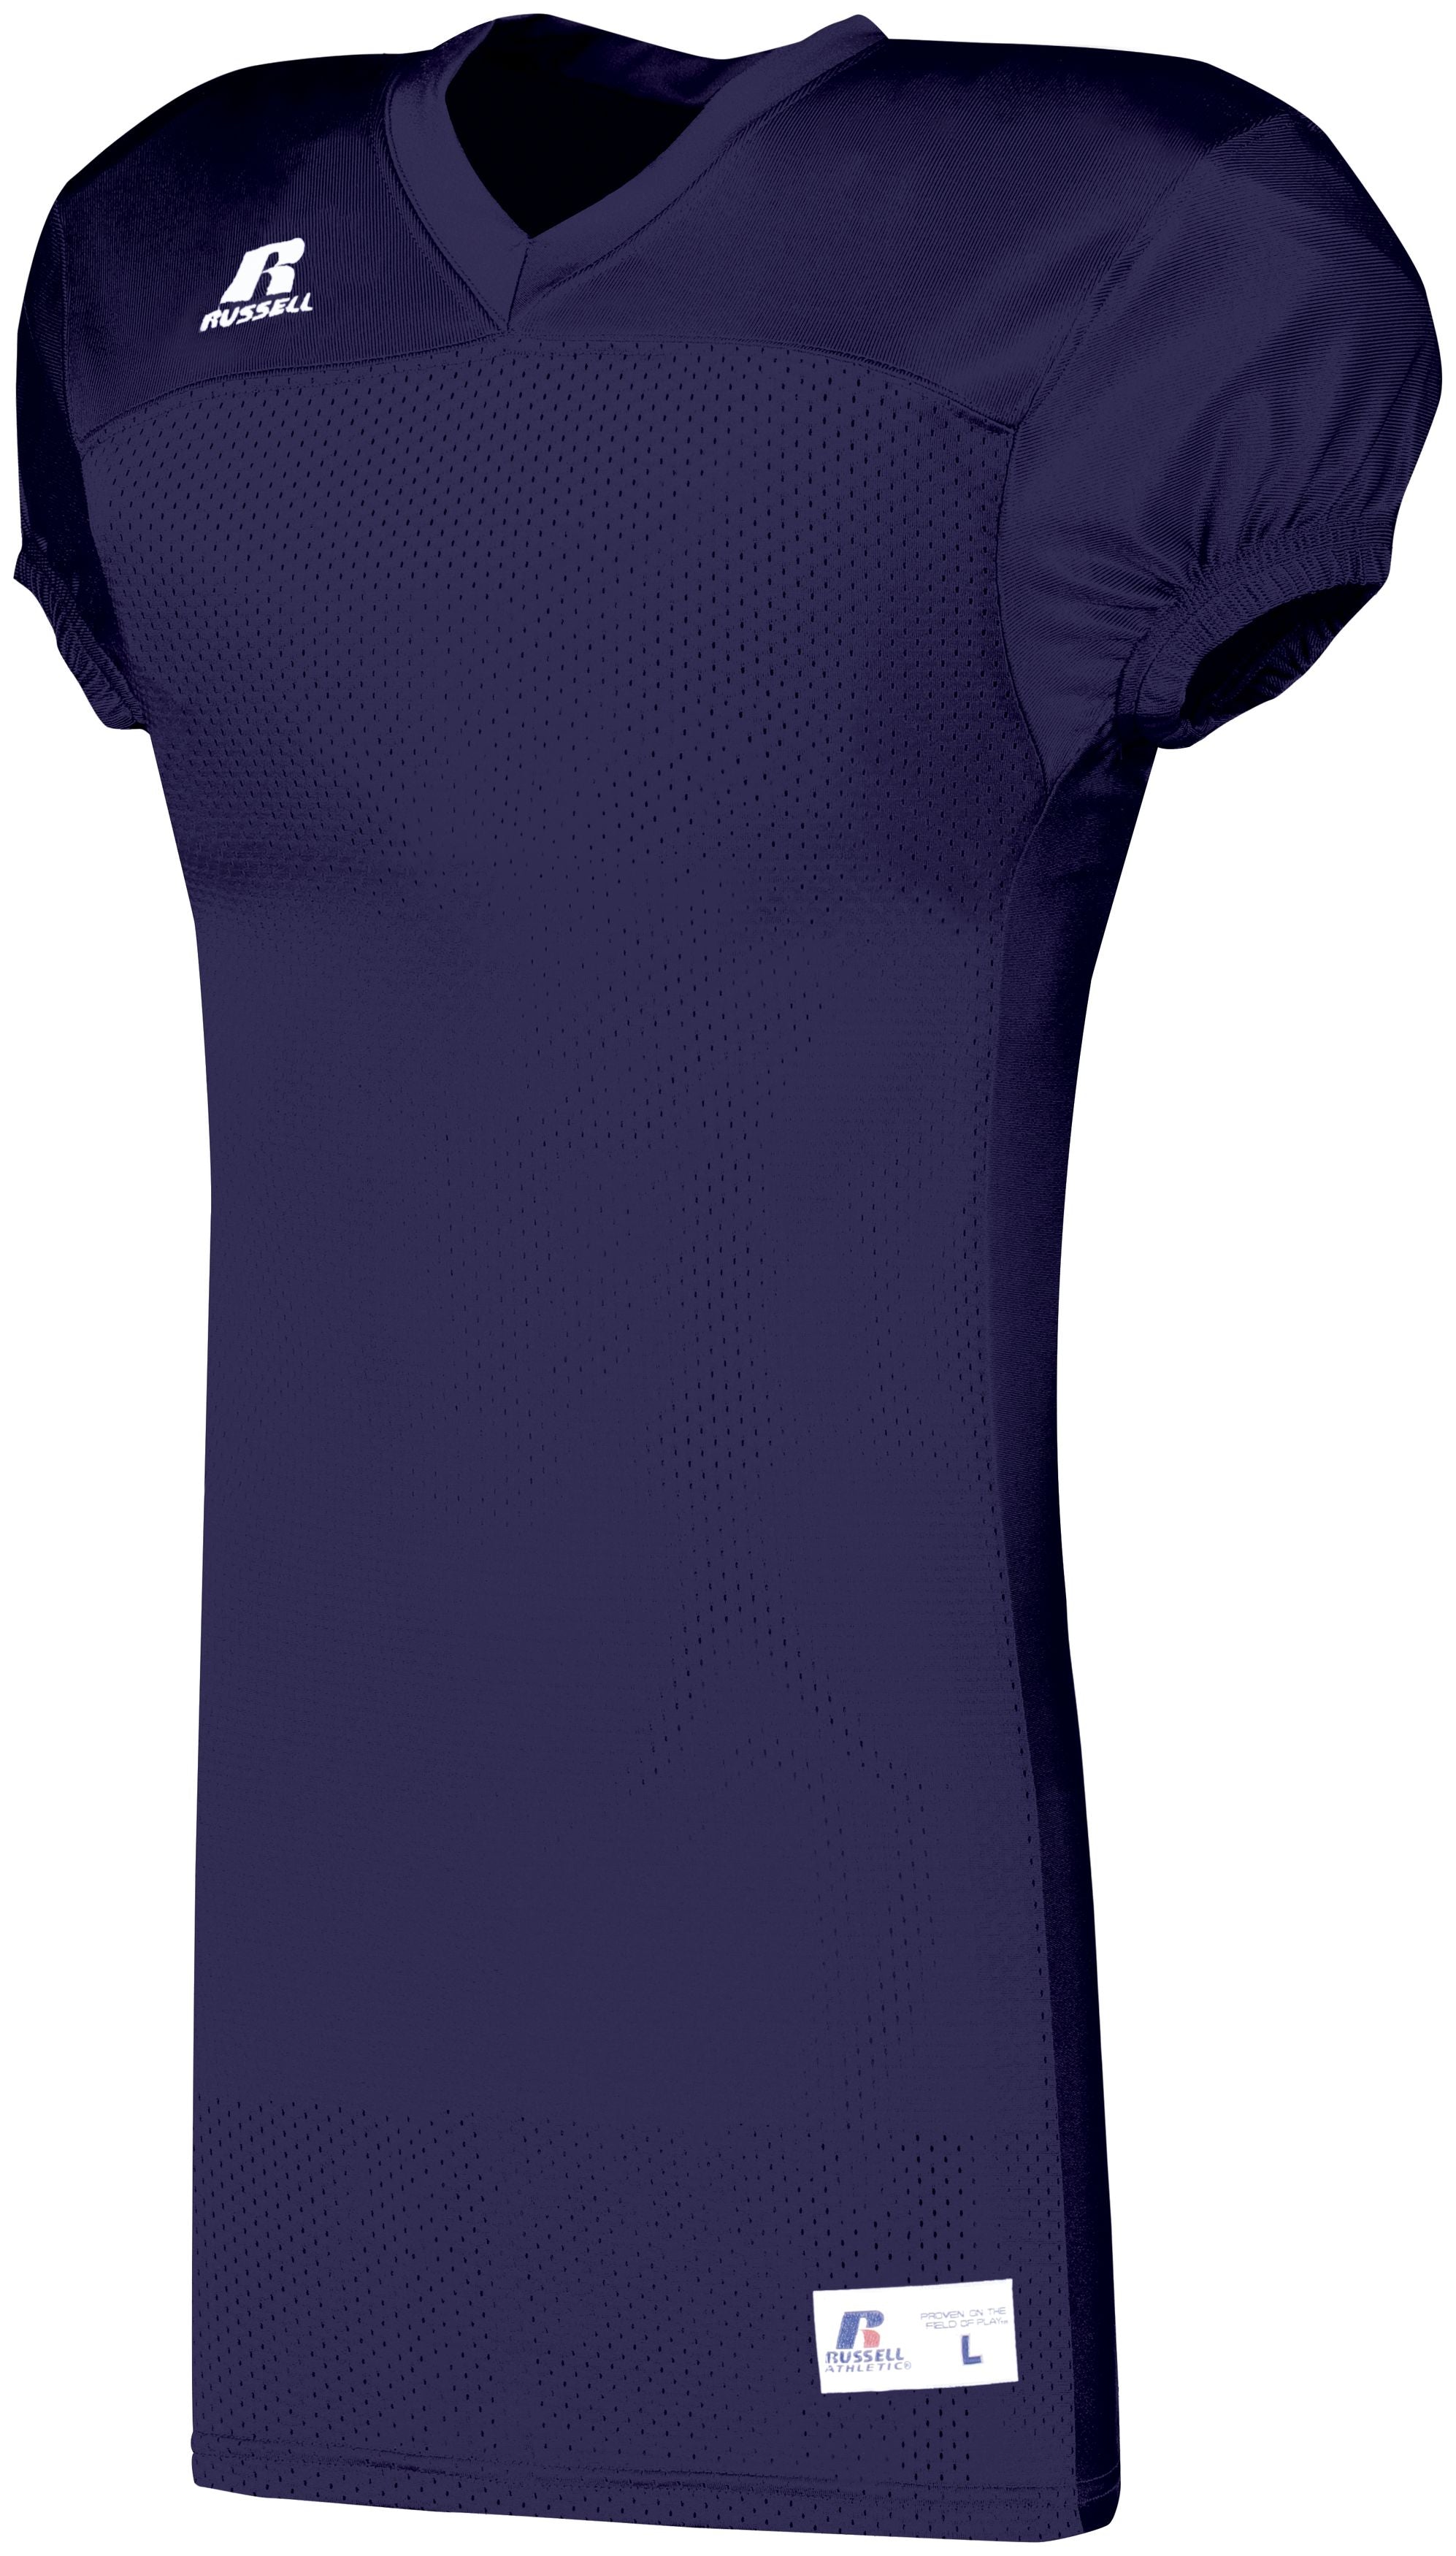 Russell Athletic Youth Solid Jersey With Side Inserts in Purple  -Part of the Youth, Youth-Jersey, Football, Russell-Athletic-Products, Shirts, All-Sports, All-Sports-1 product lines at KanaleyCreations.com